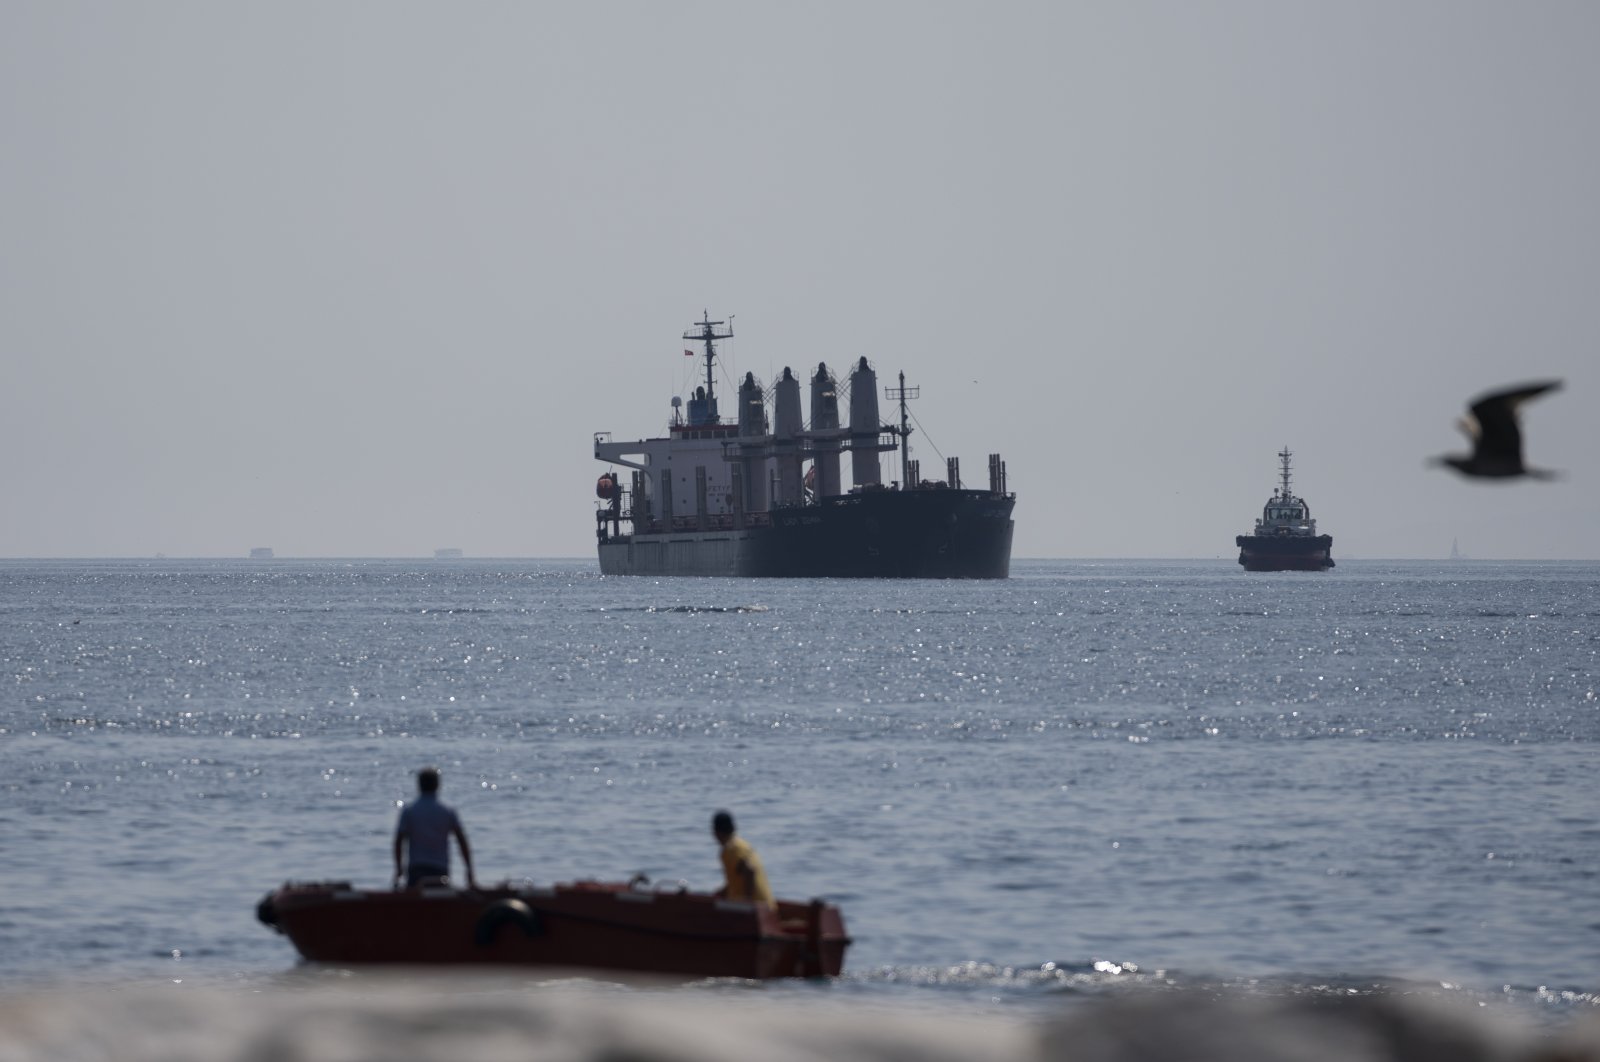 The Panama-flagged cargo ship Lady Zehma, carrying tons of grain from Ukraine, anchors in the Marmara Sea in Istanbul, Turkey, Sept. 2, 2022. (AP Photo)